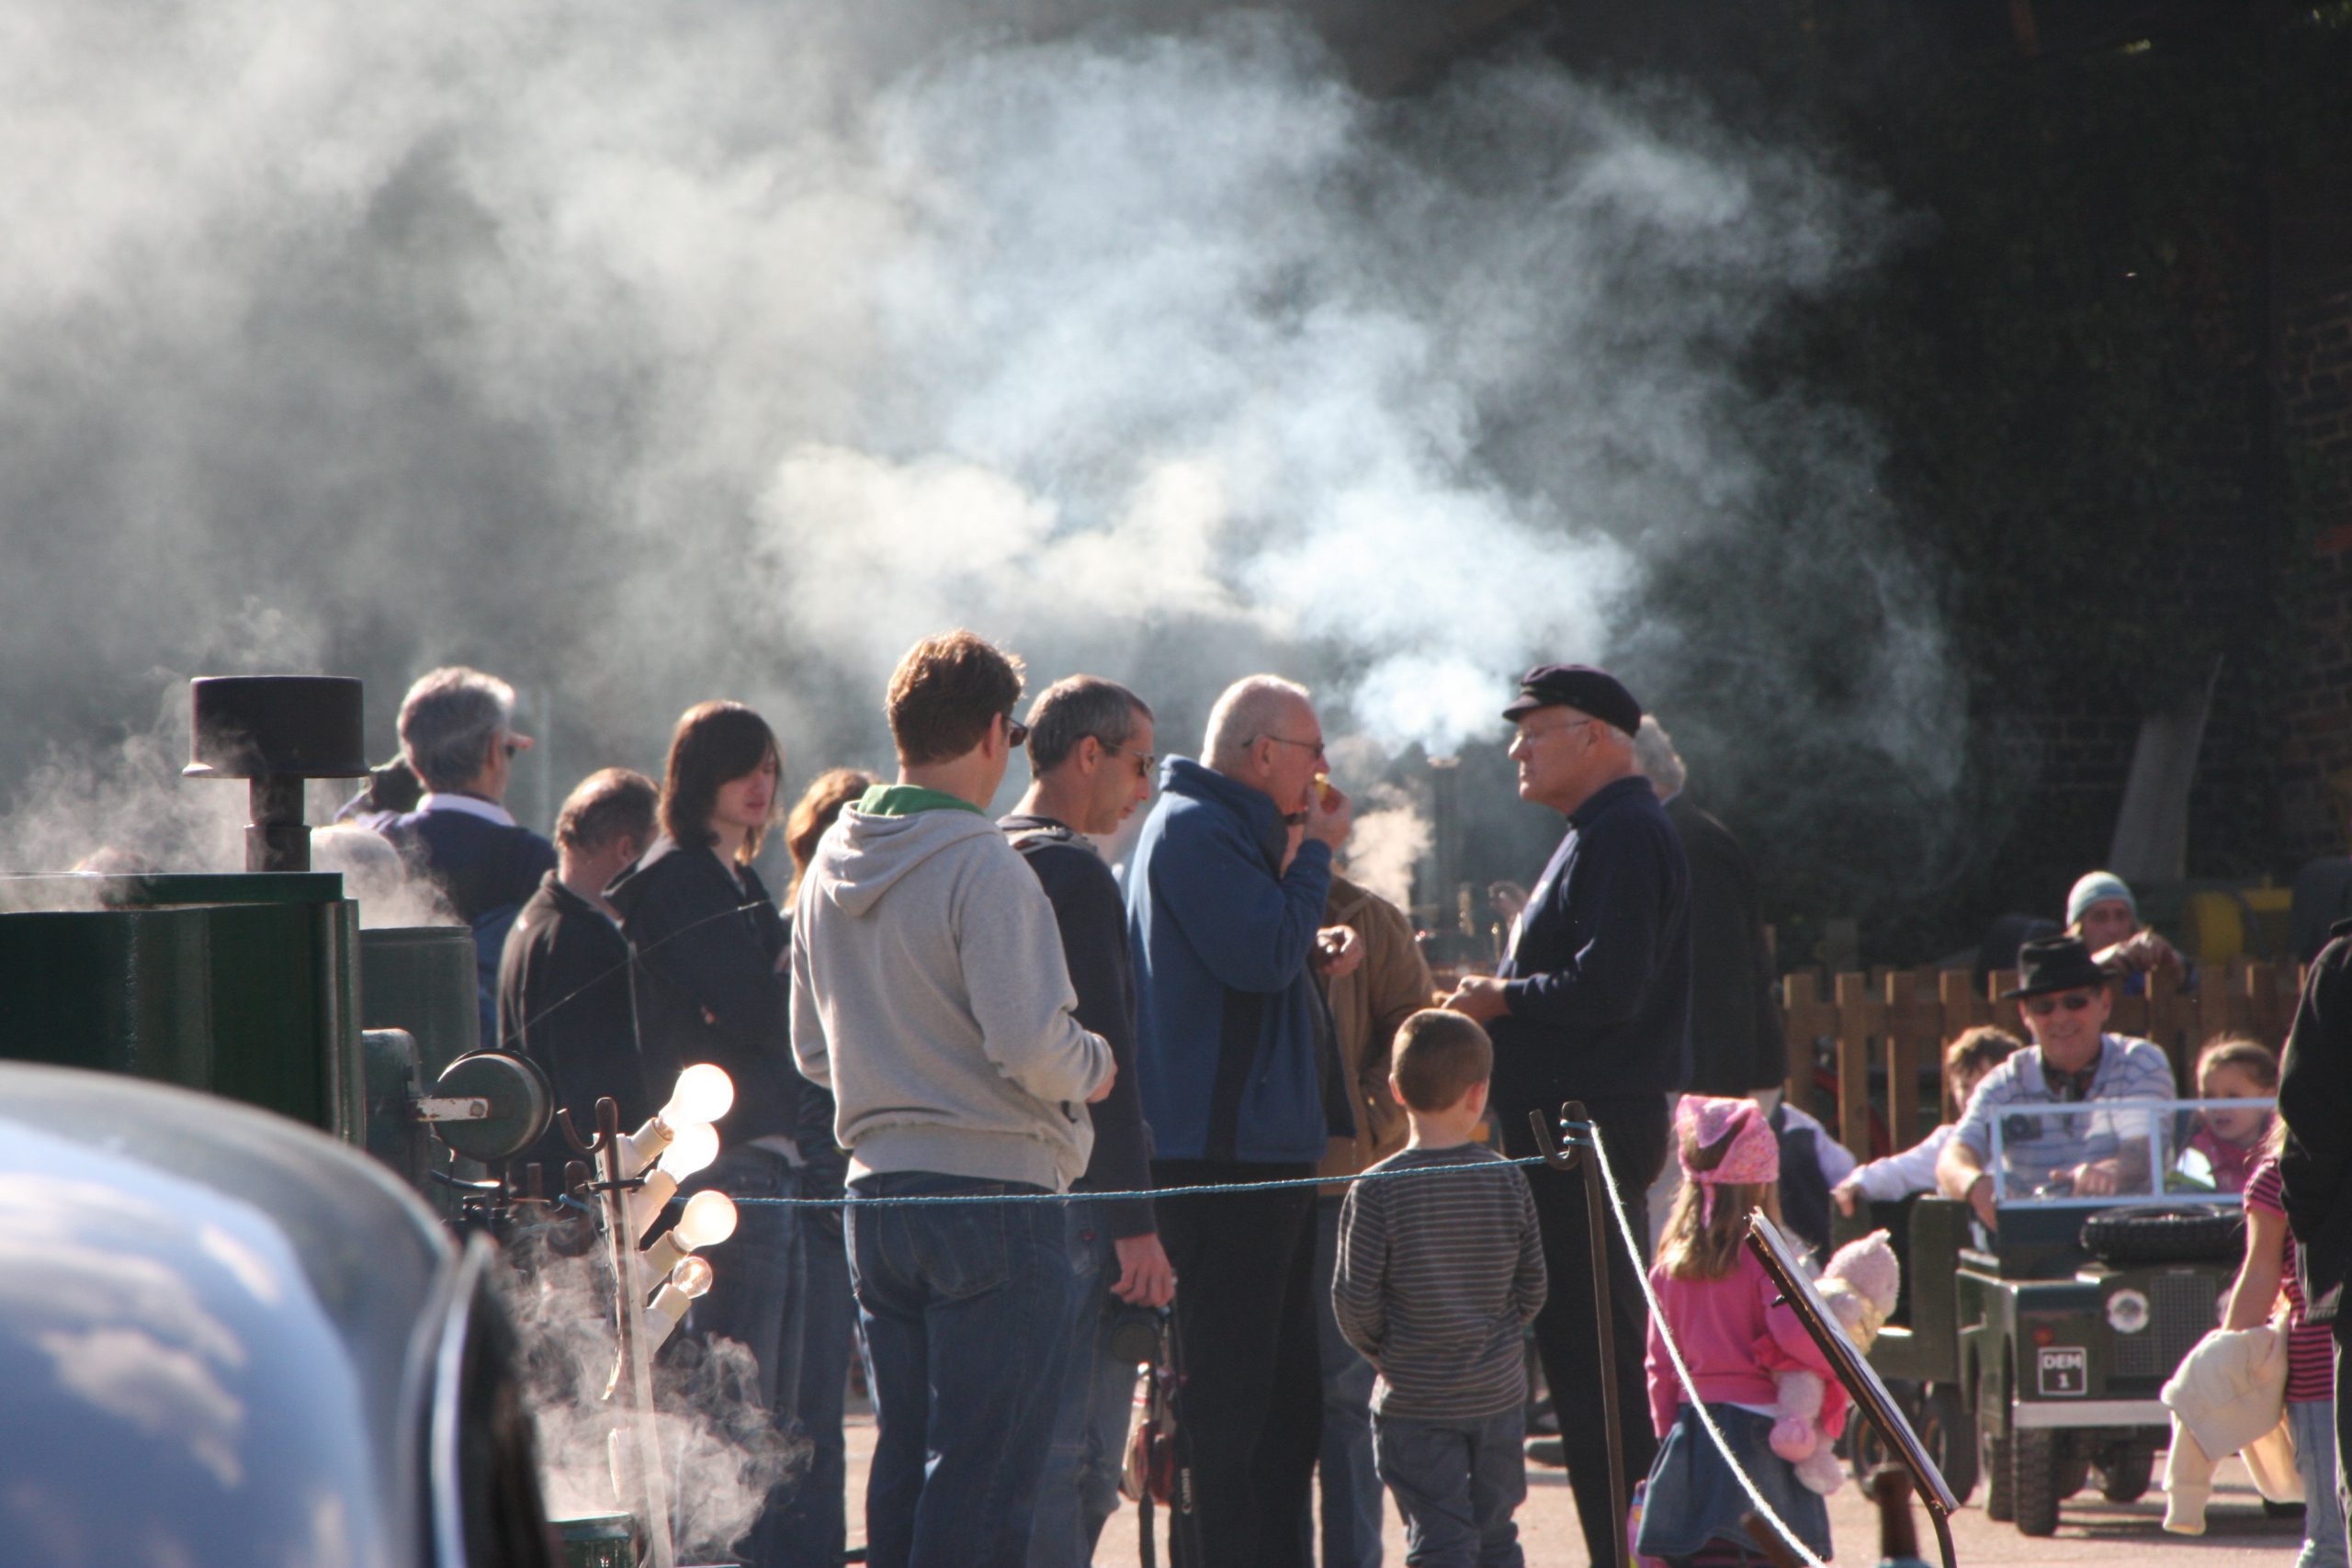 The Brickworks Museum Steam Up Event